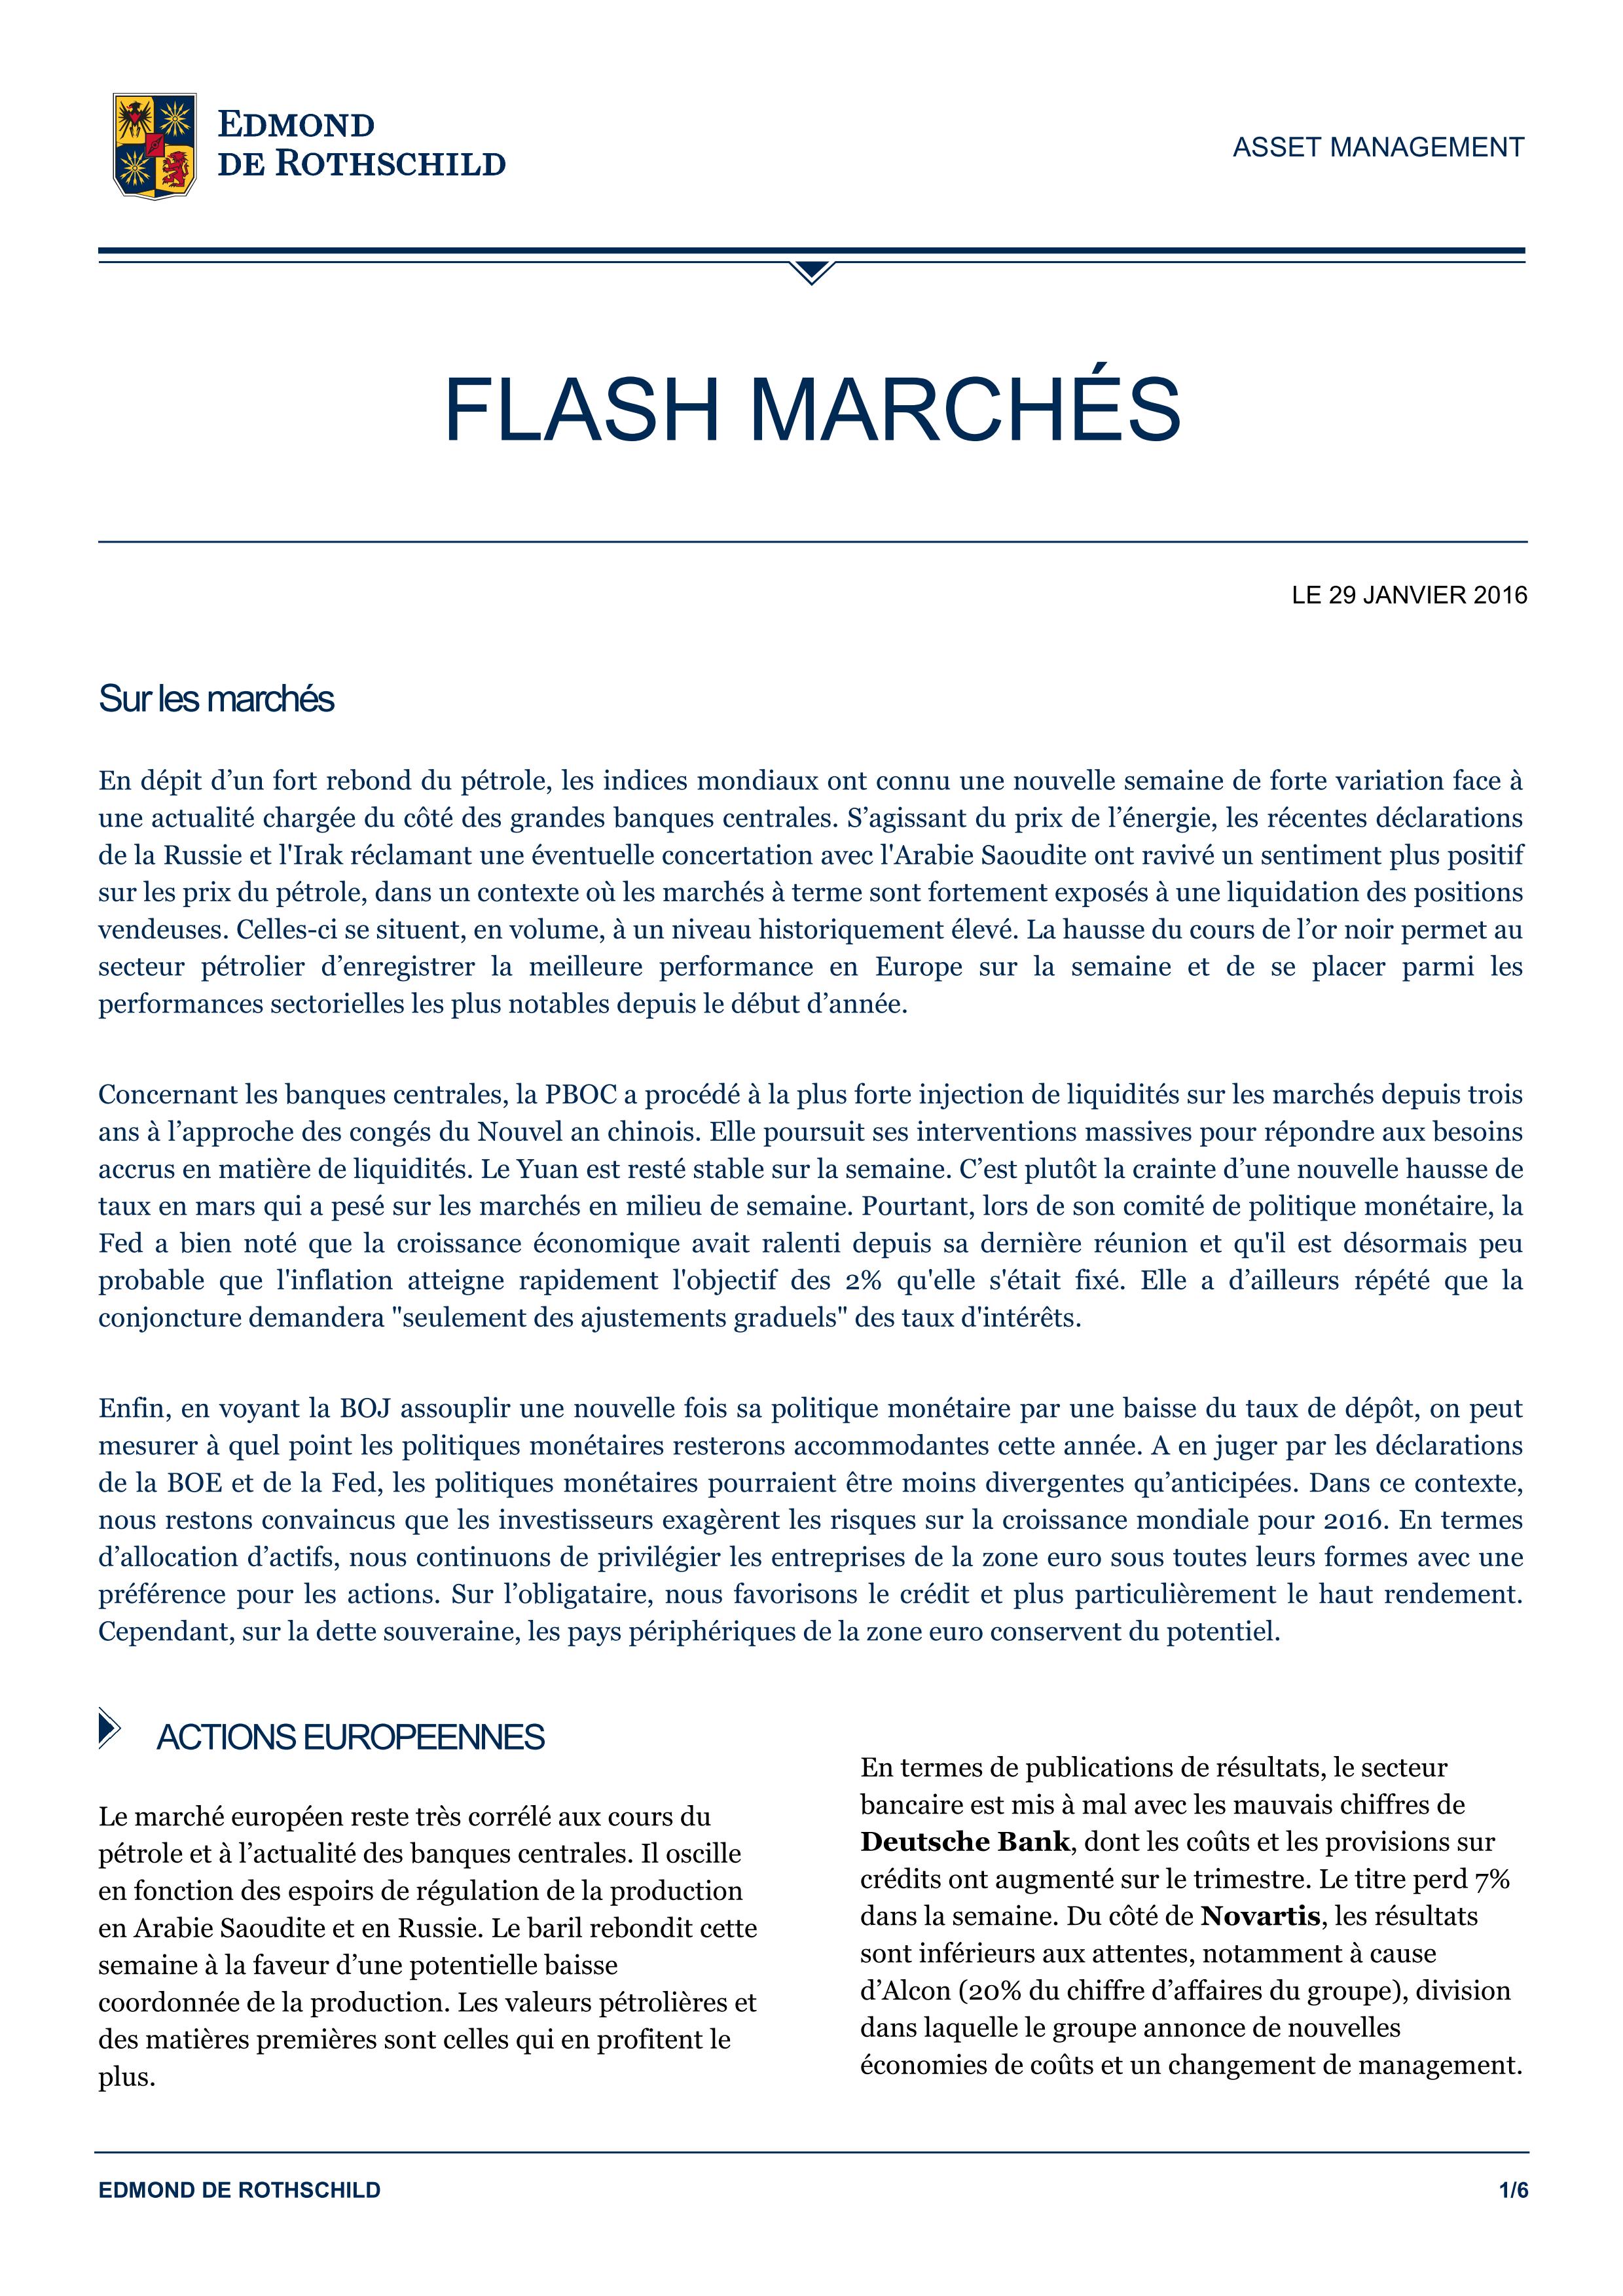 Flash_Marches_FR_perf_29012016_01